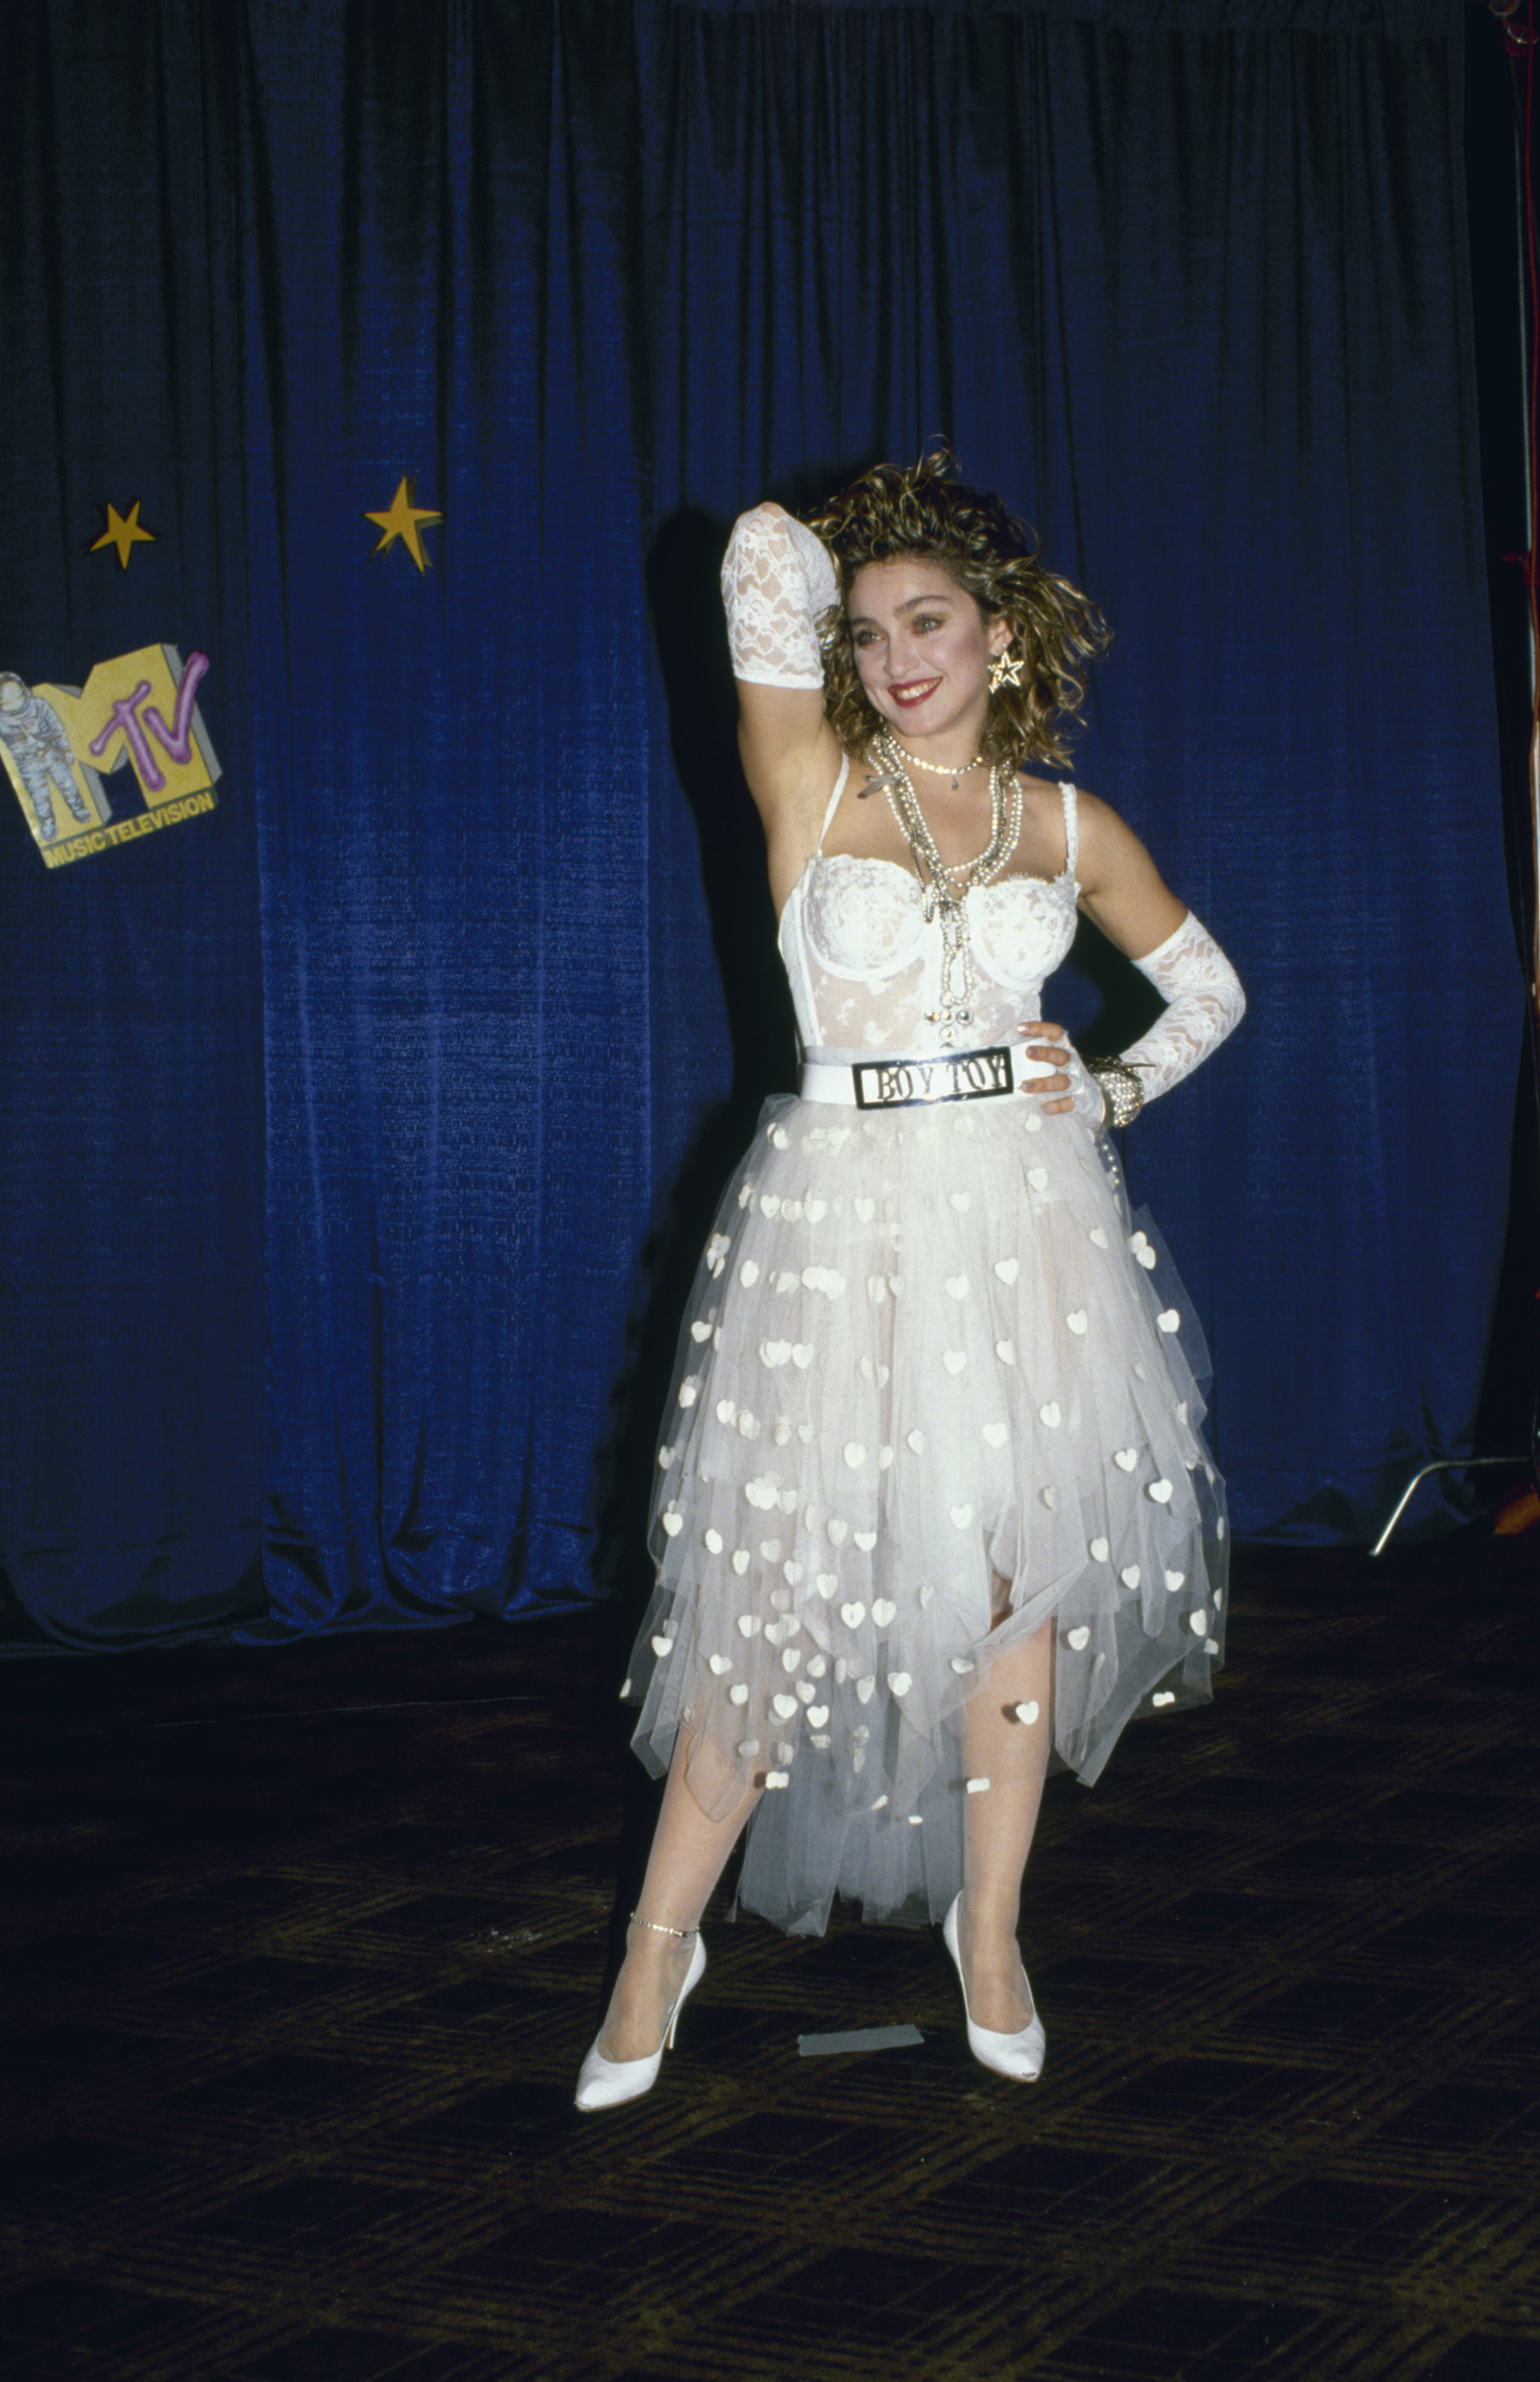 American singer and actress Madonna, dressed in white lace lingerie, pearls, and a 'Boy Toy' belt buckle, stands with one hand on her head and one on her hip at First Annual MTV Video Music Awards, held at Tavern on the Green, New York, New York, September 14, 1984. (Photo by David McGough/DMI/The LIFE Picture Collection via Getty Images)